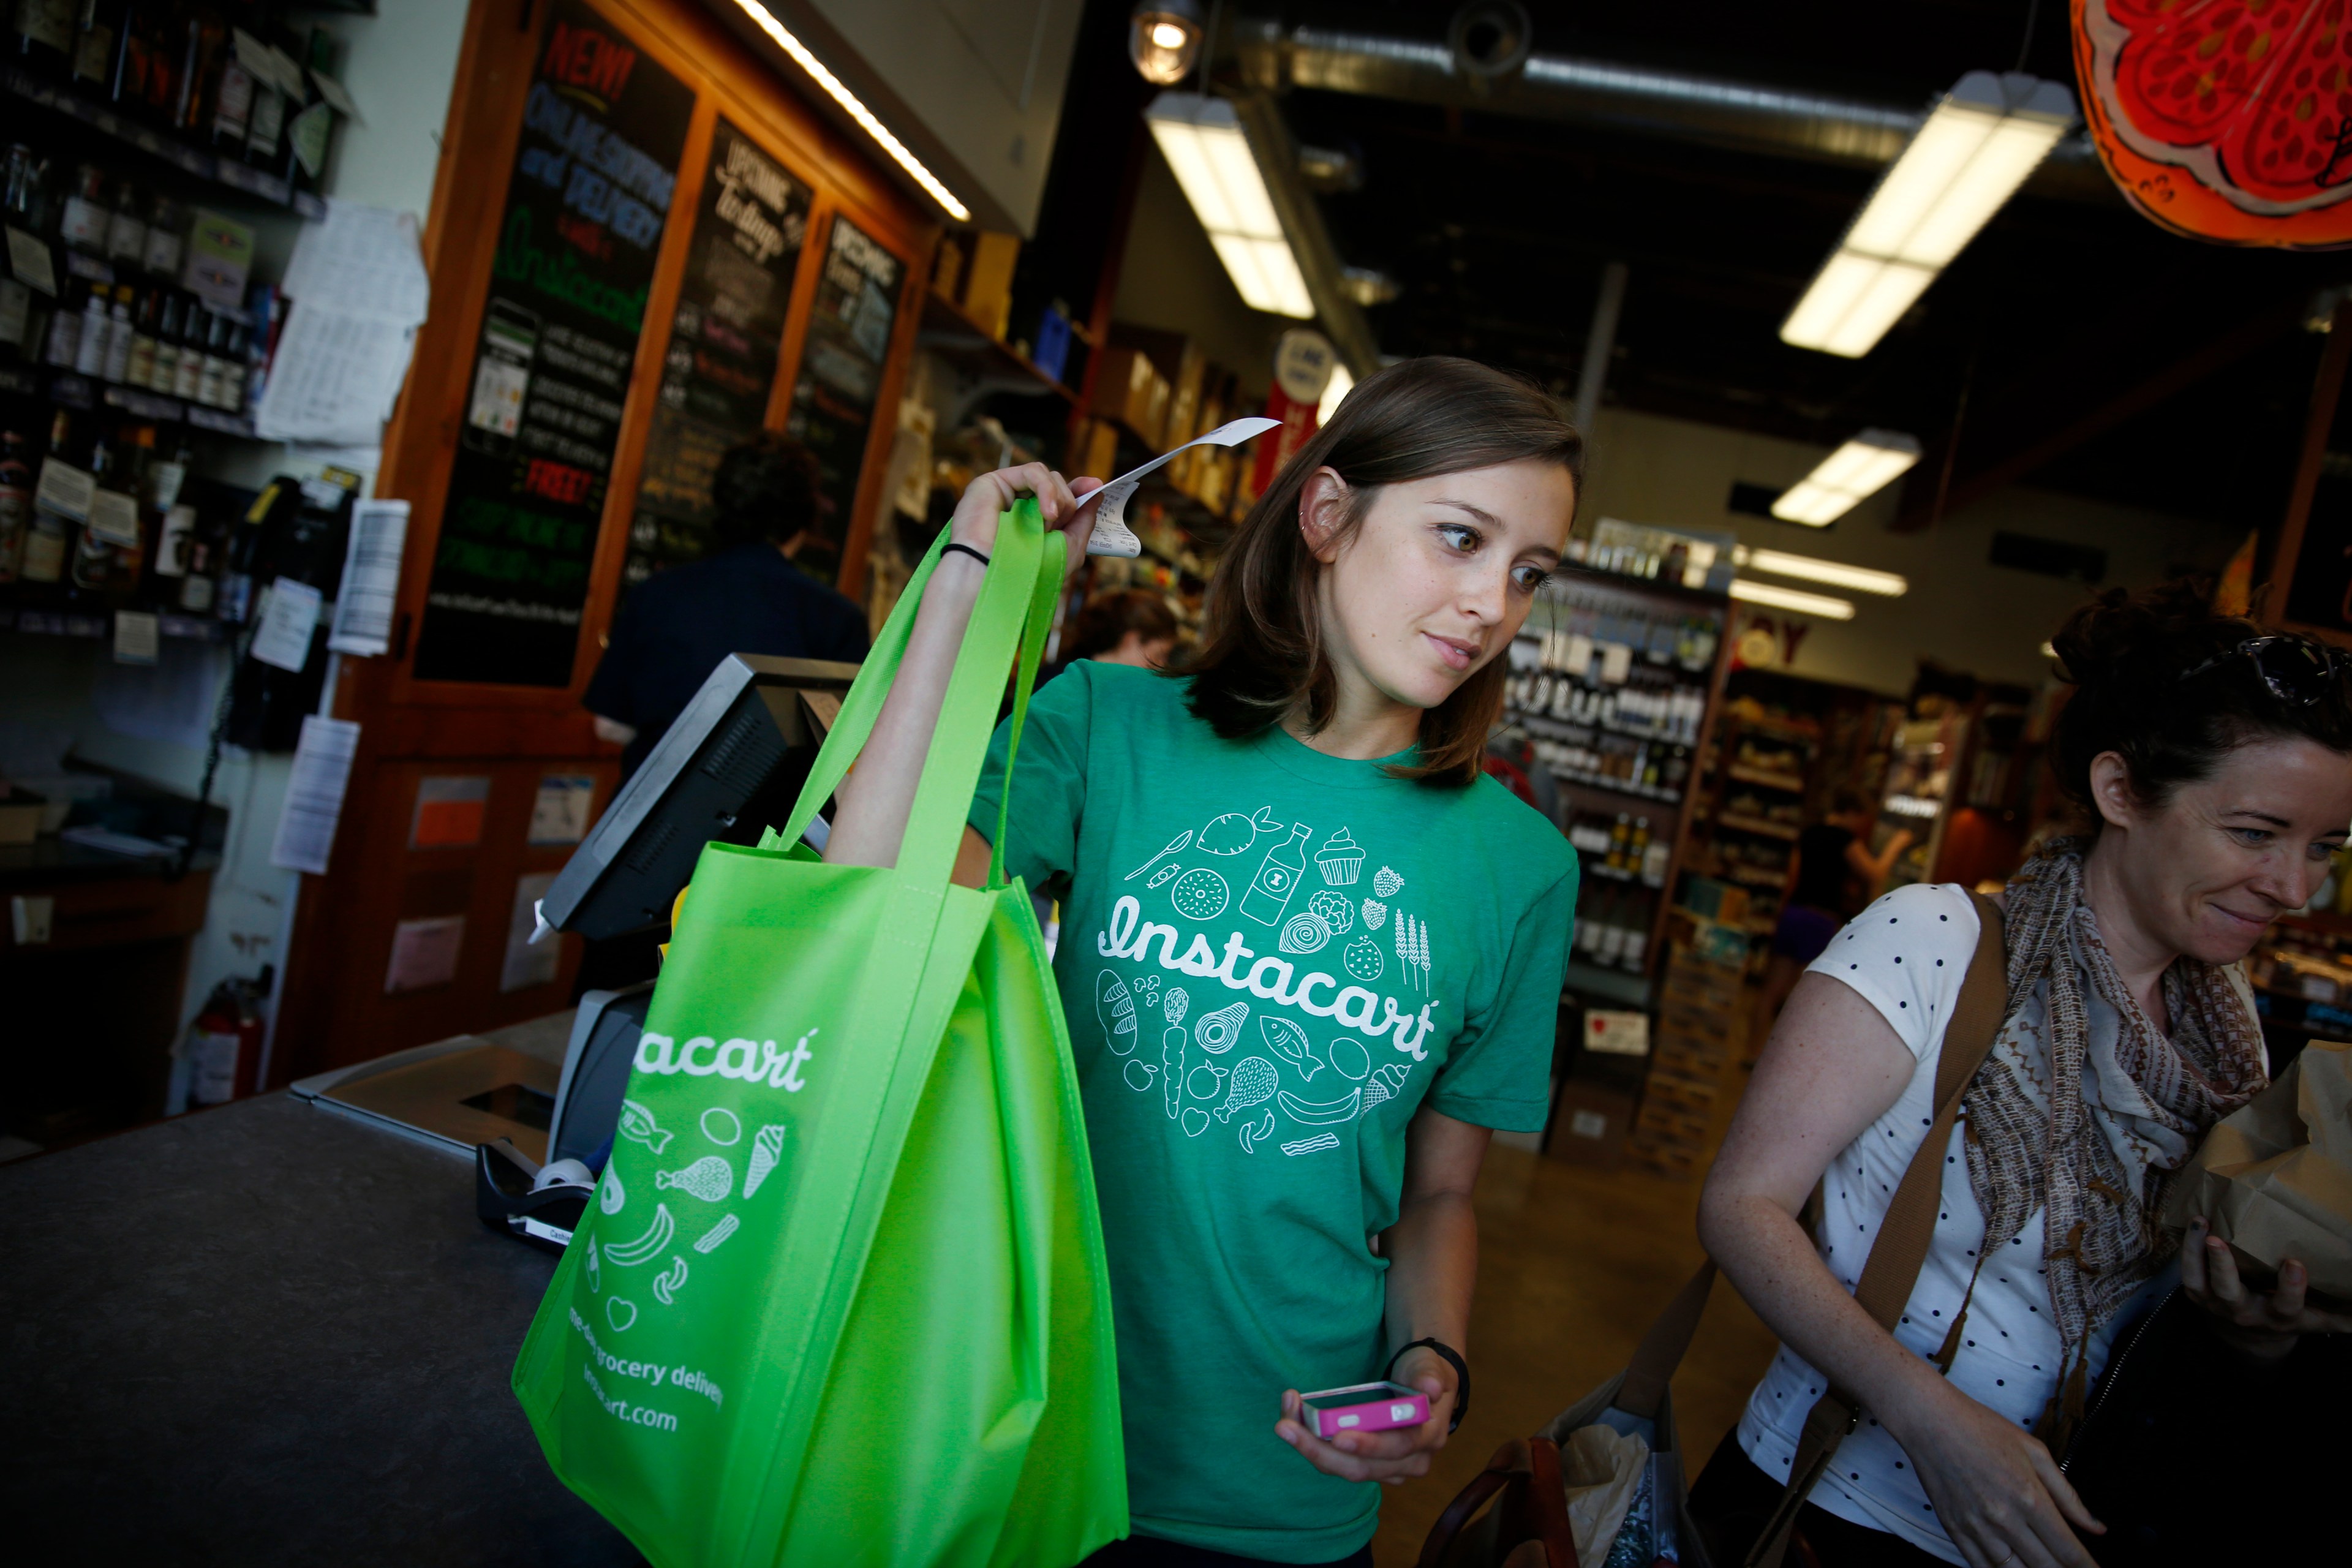 San Francisco-Based Grocery Delivery Company Instacart Files for Long-Awaited IPO